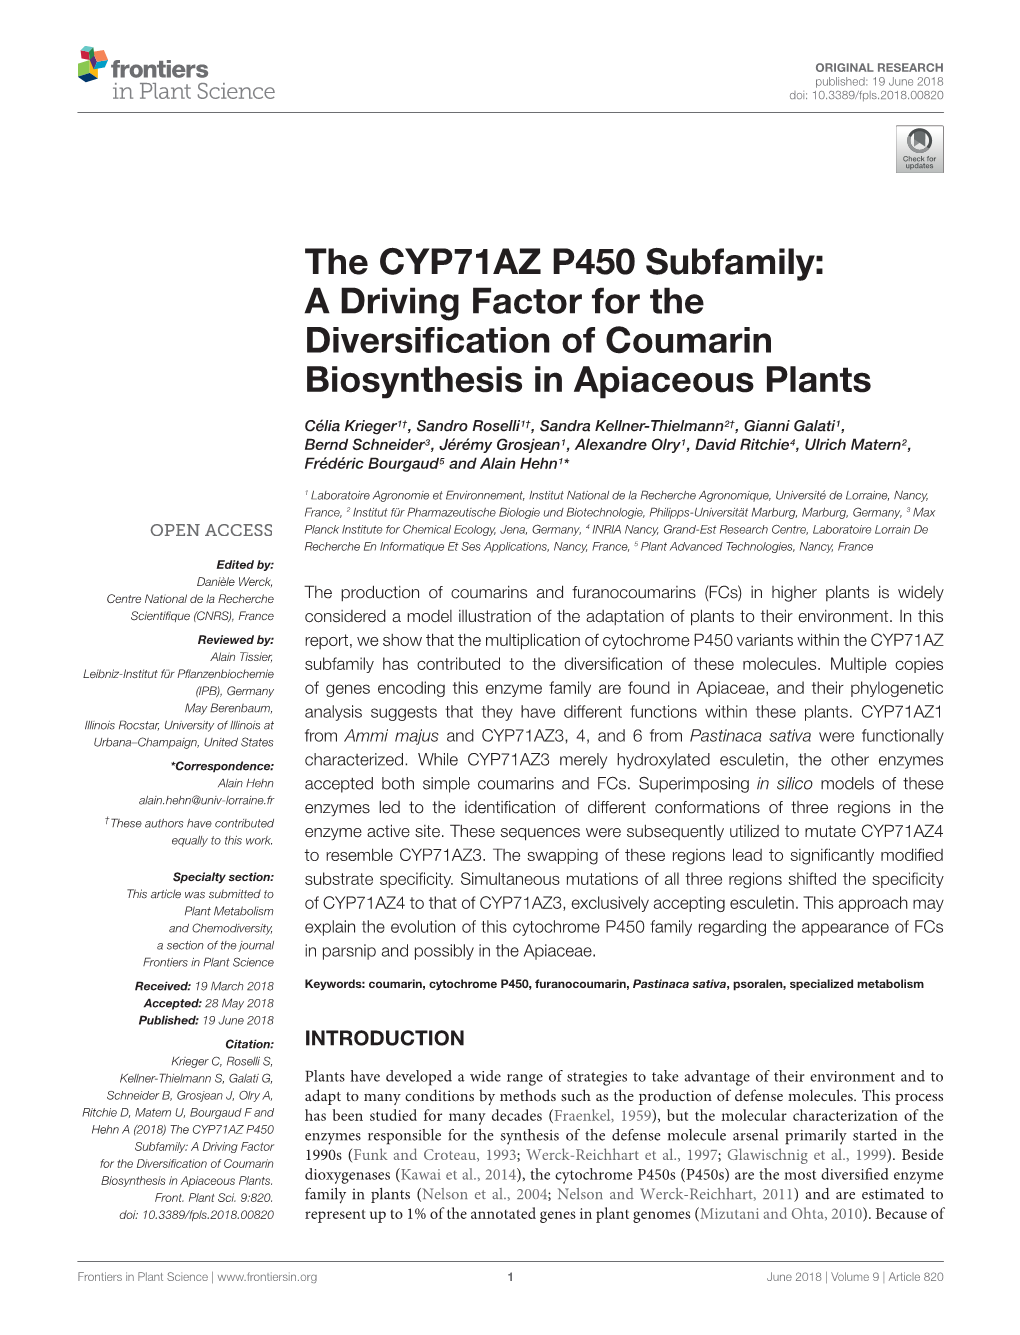 The CYP71AZ P450 Subfamily: a Driving Factor for the Diversification